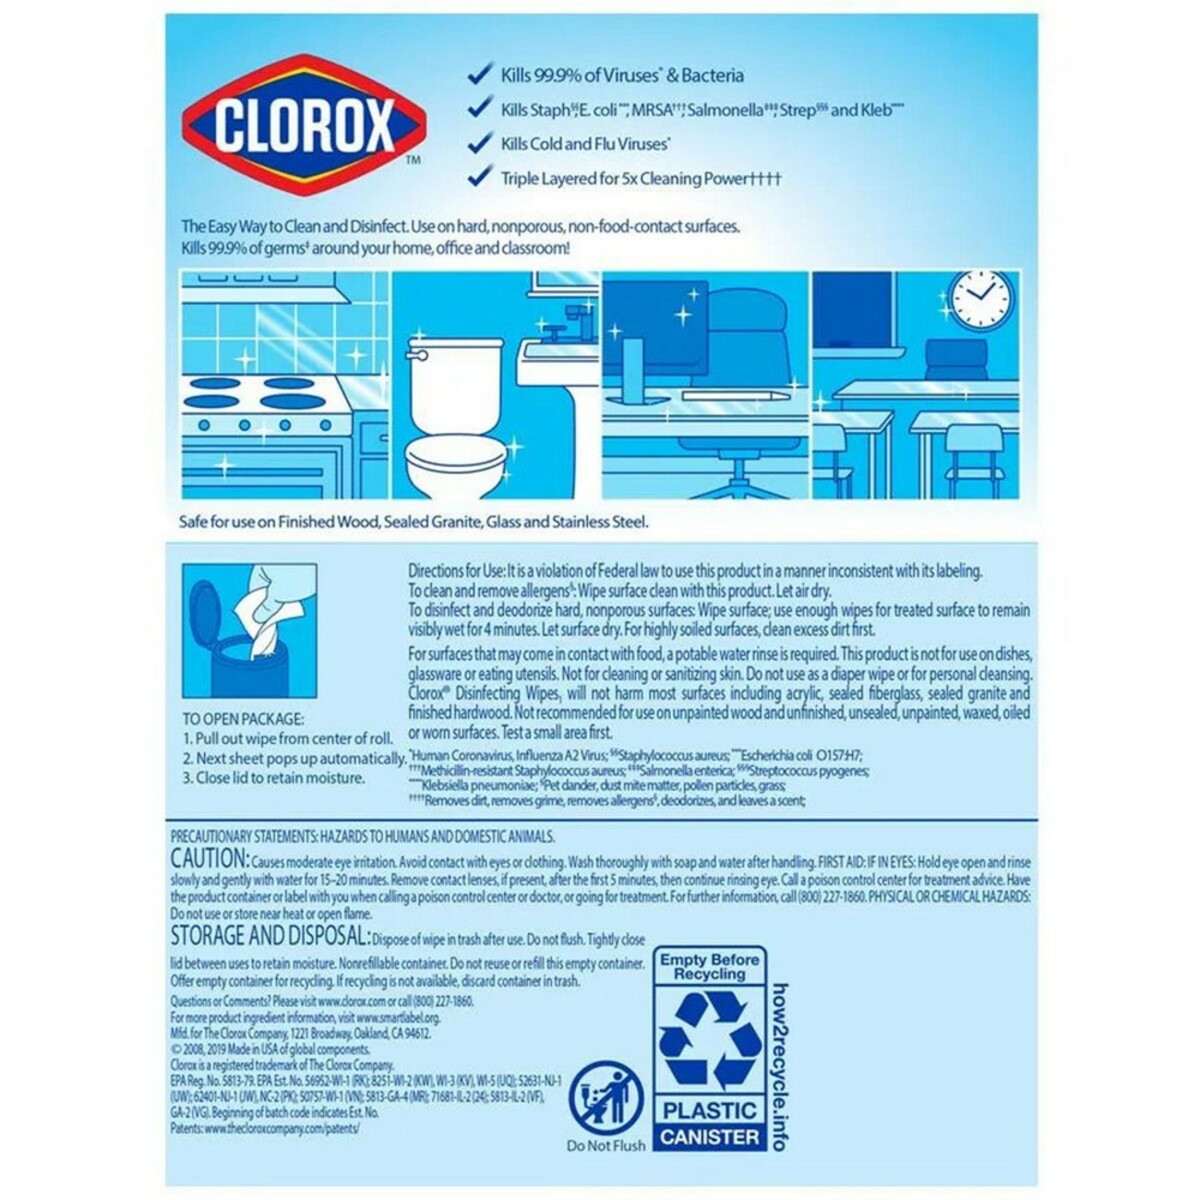 Clorox Disinfecting Wipes Can Fresh 35's